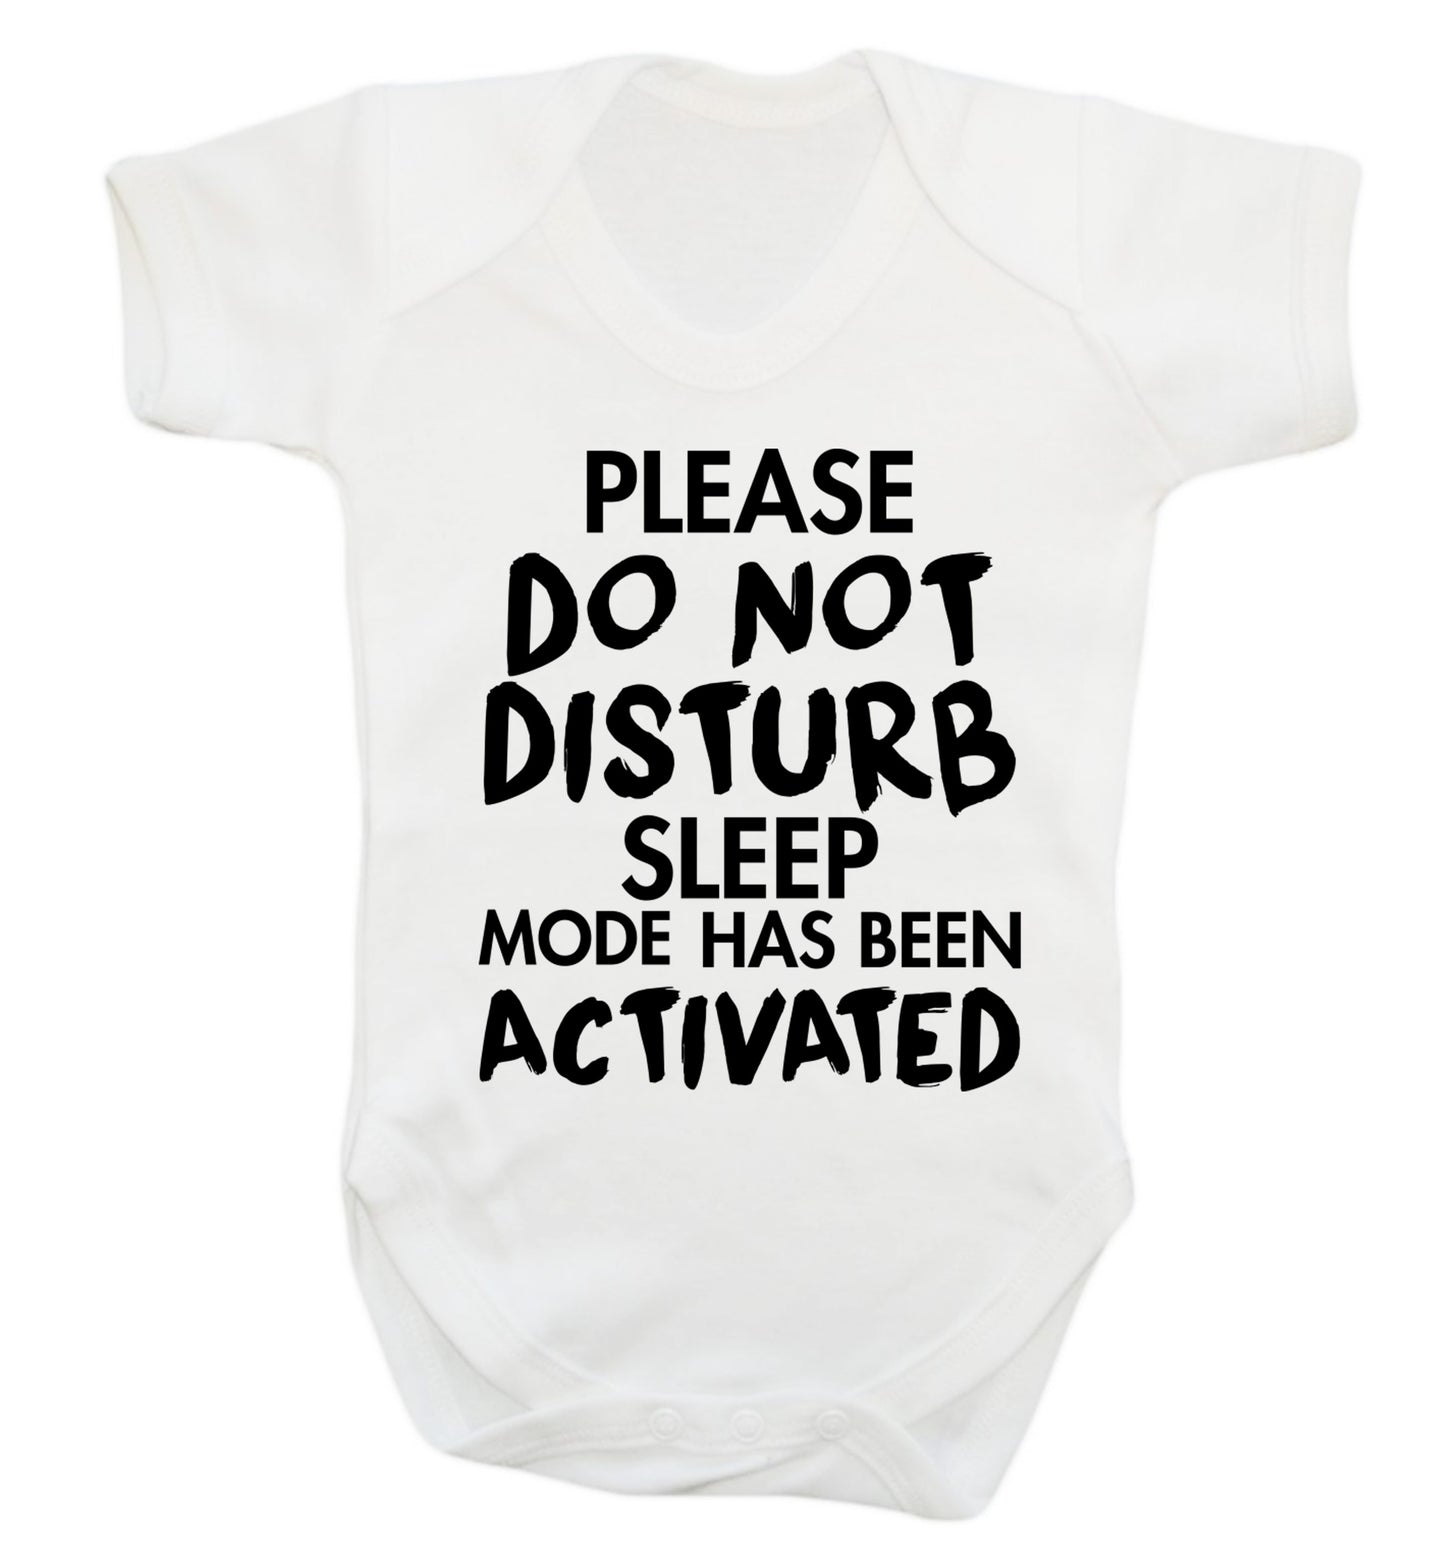 Please do not disturb sleeping mode has been activated Baby Vest white 18-24 months